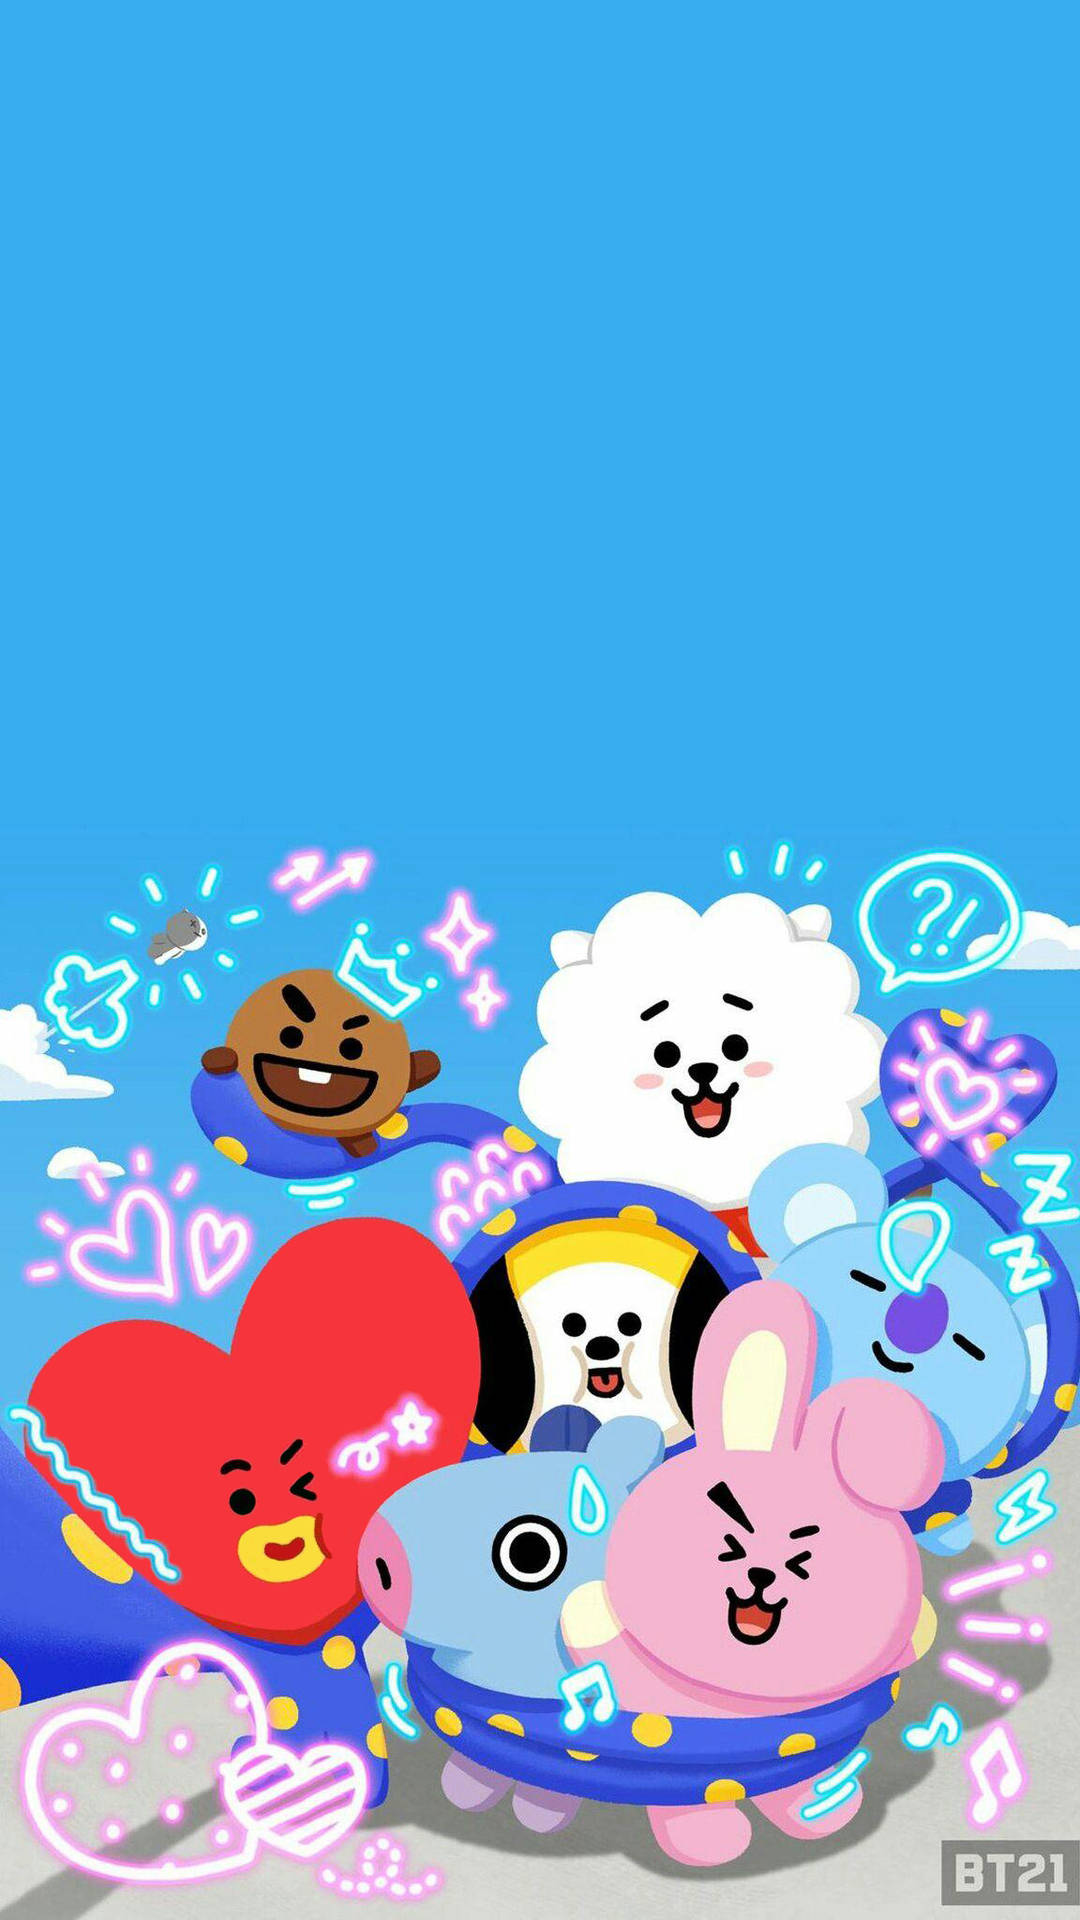 Tata With Bt21 Squad Background